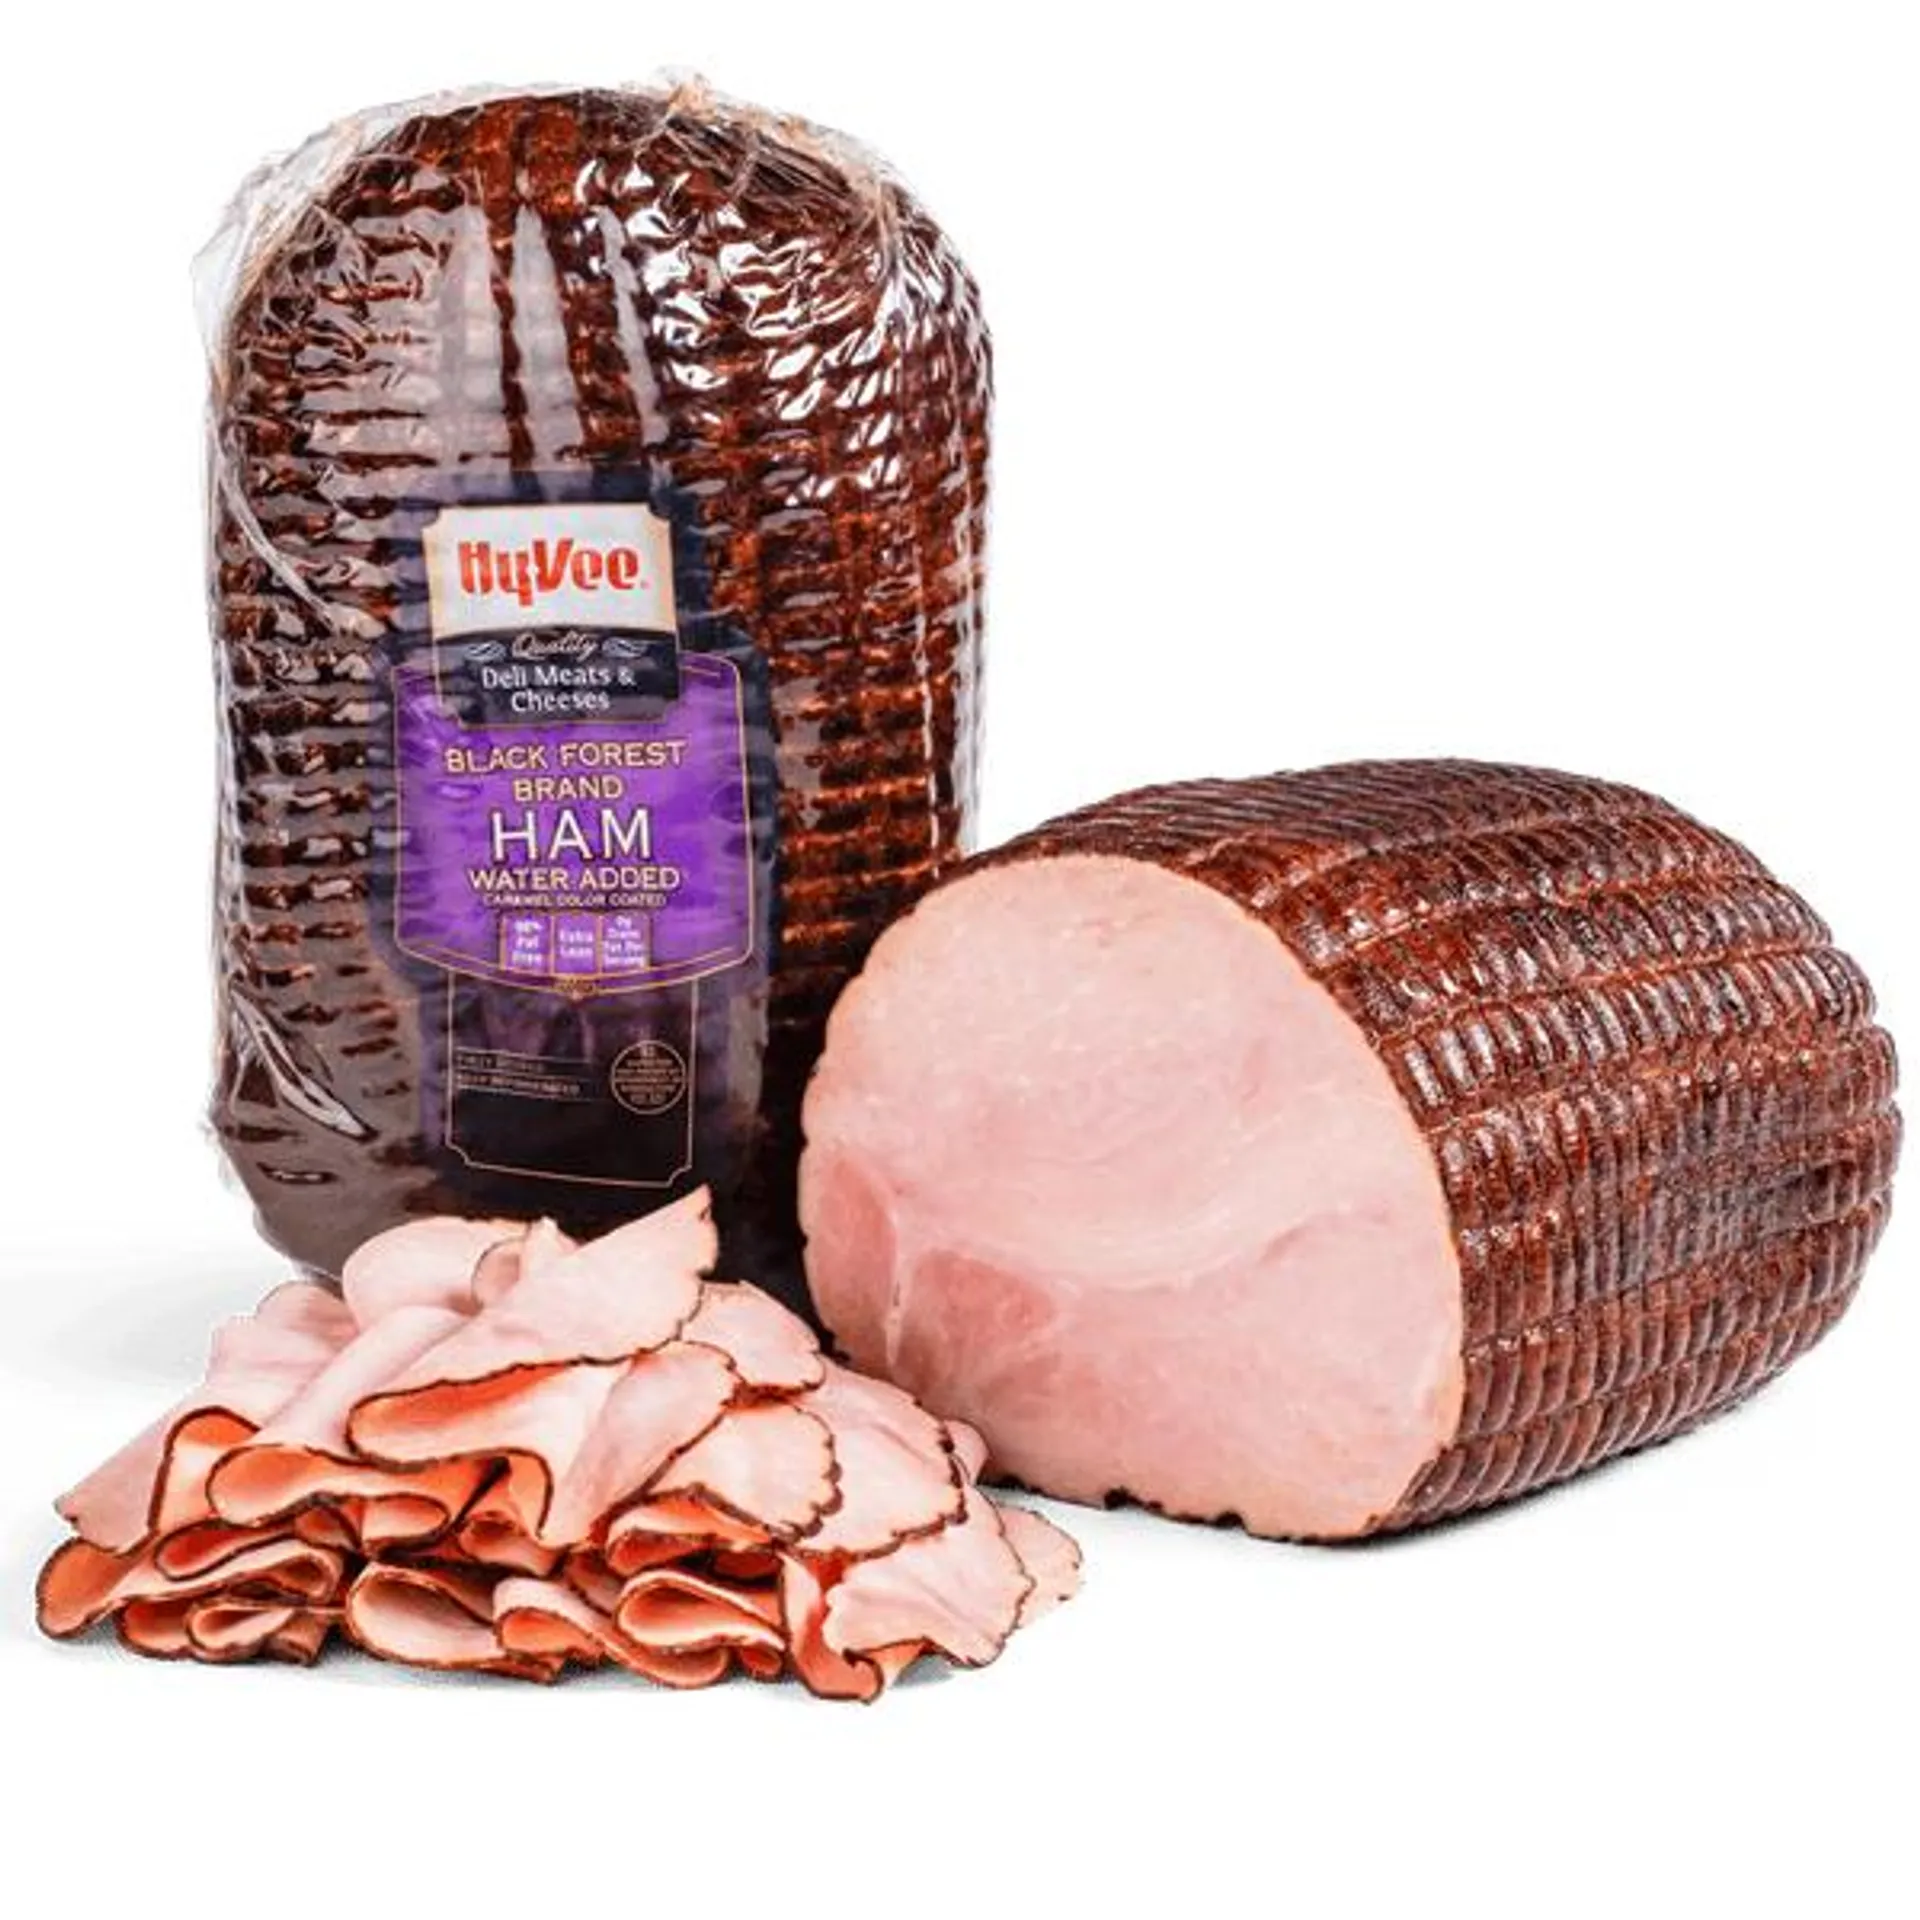 Hy-Vee Quality Black Forest Smoked Ham